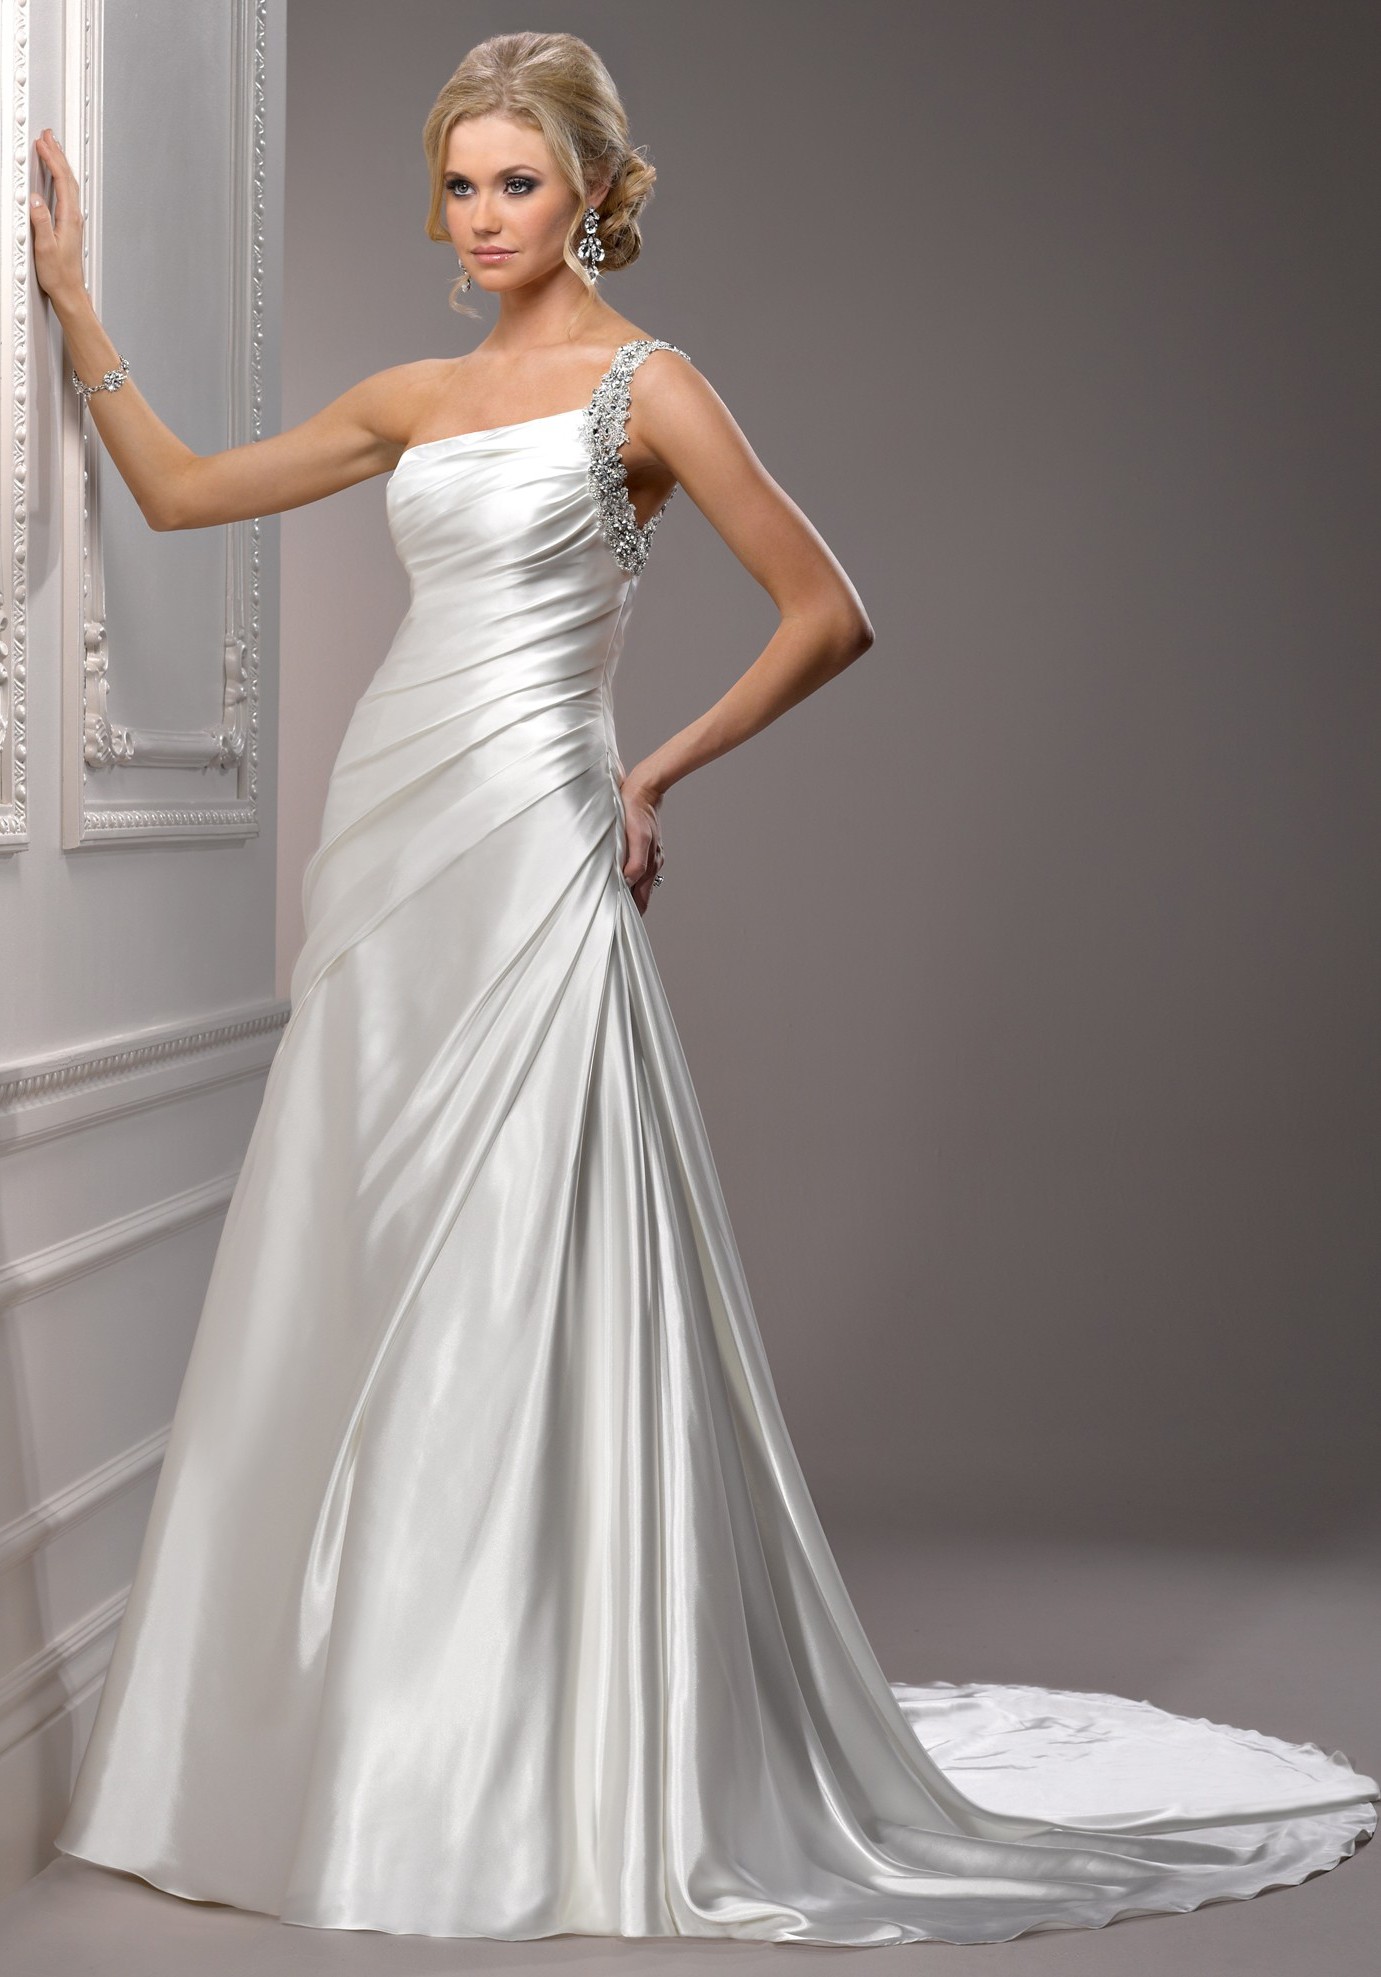 Best Satin Wedding Dress of all time Check it out now | mermaidwedding3